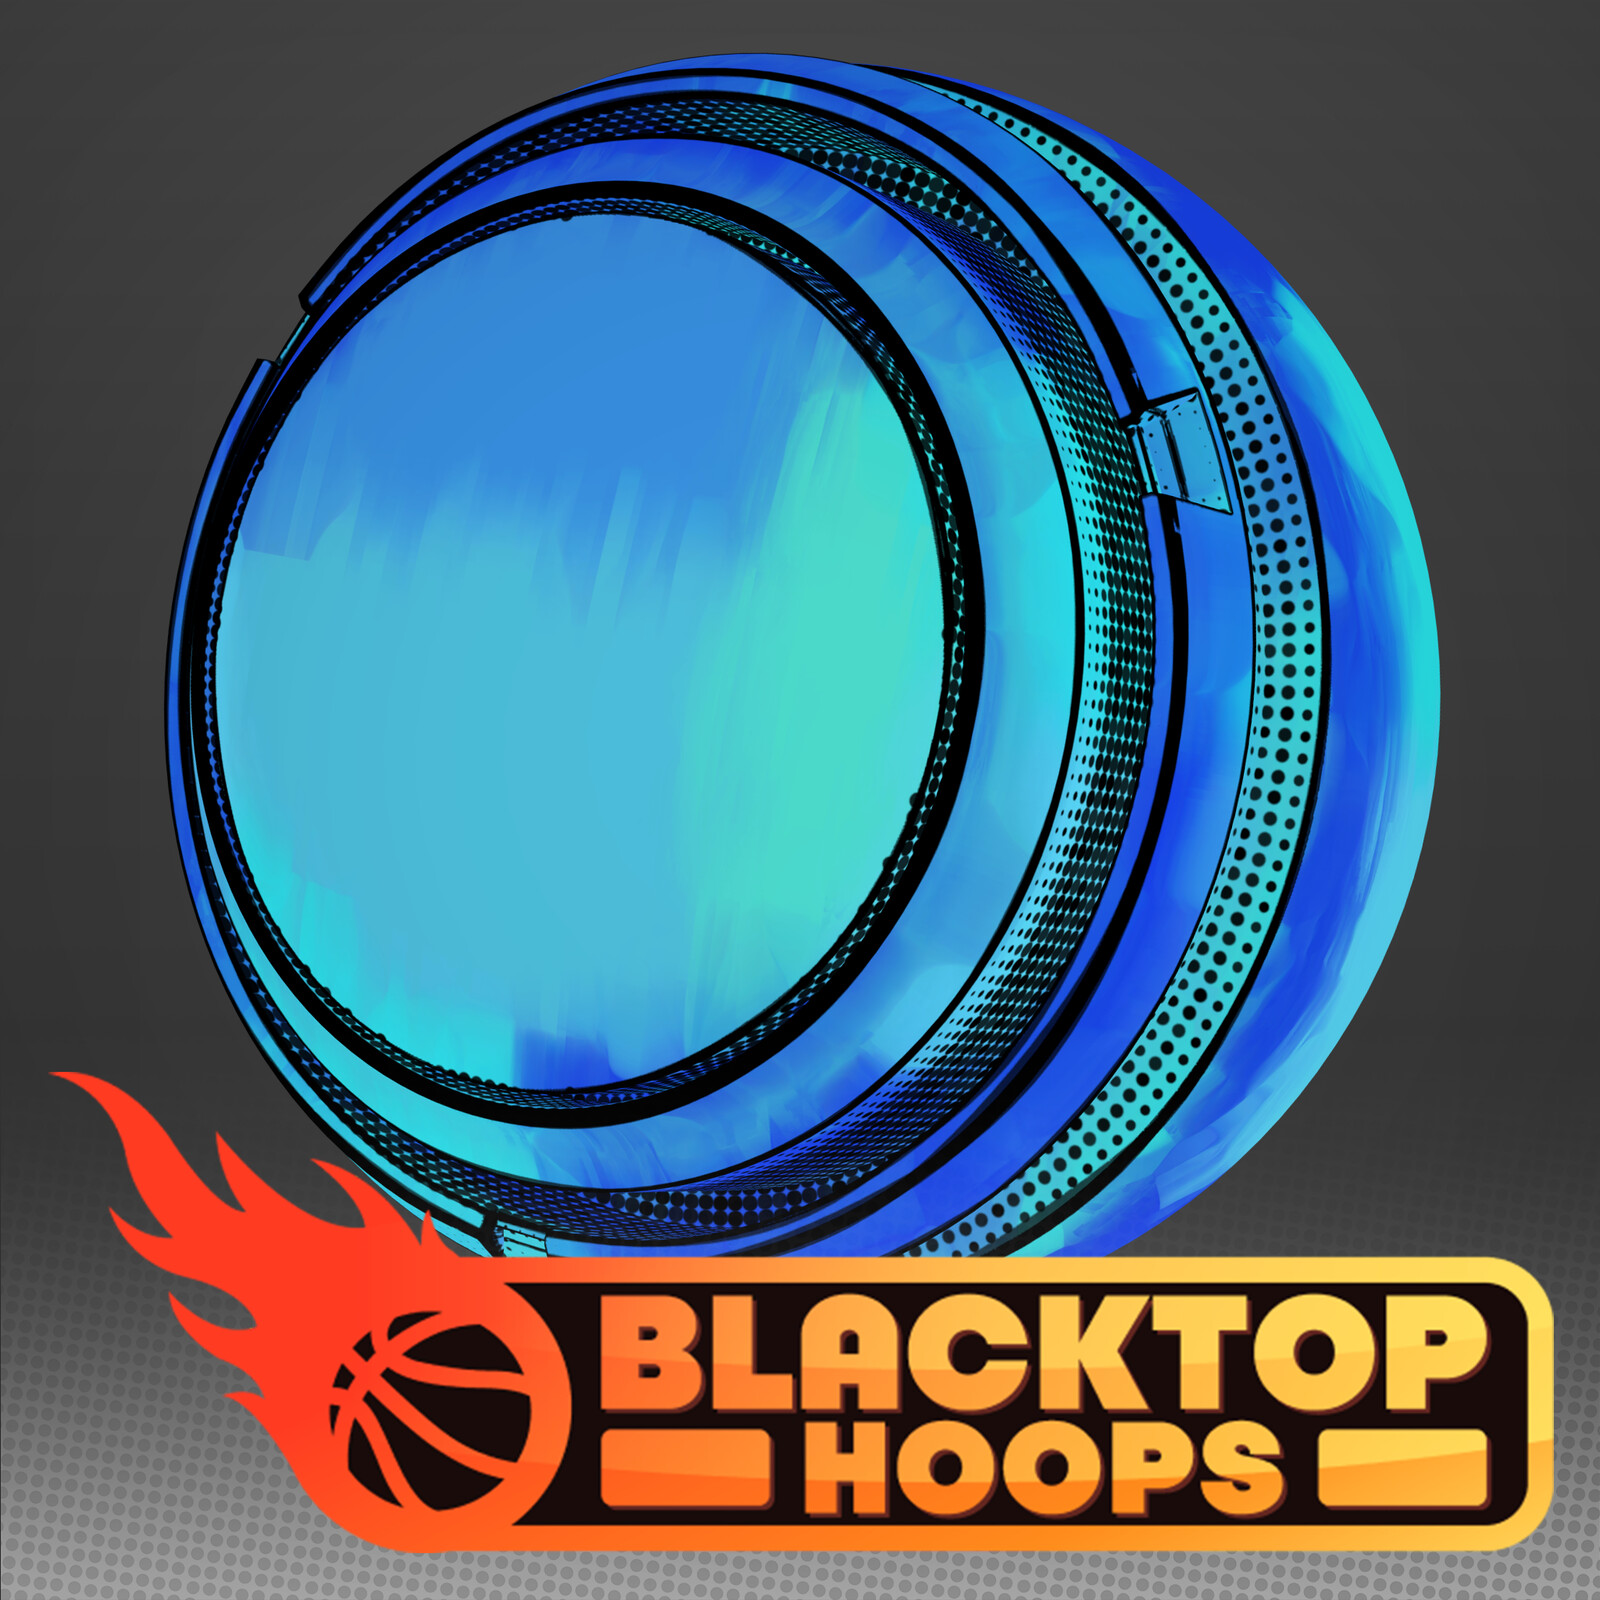 Blacktop Hoops: Stylized Base Material